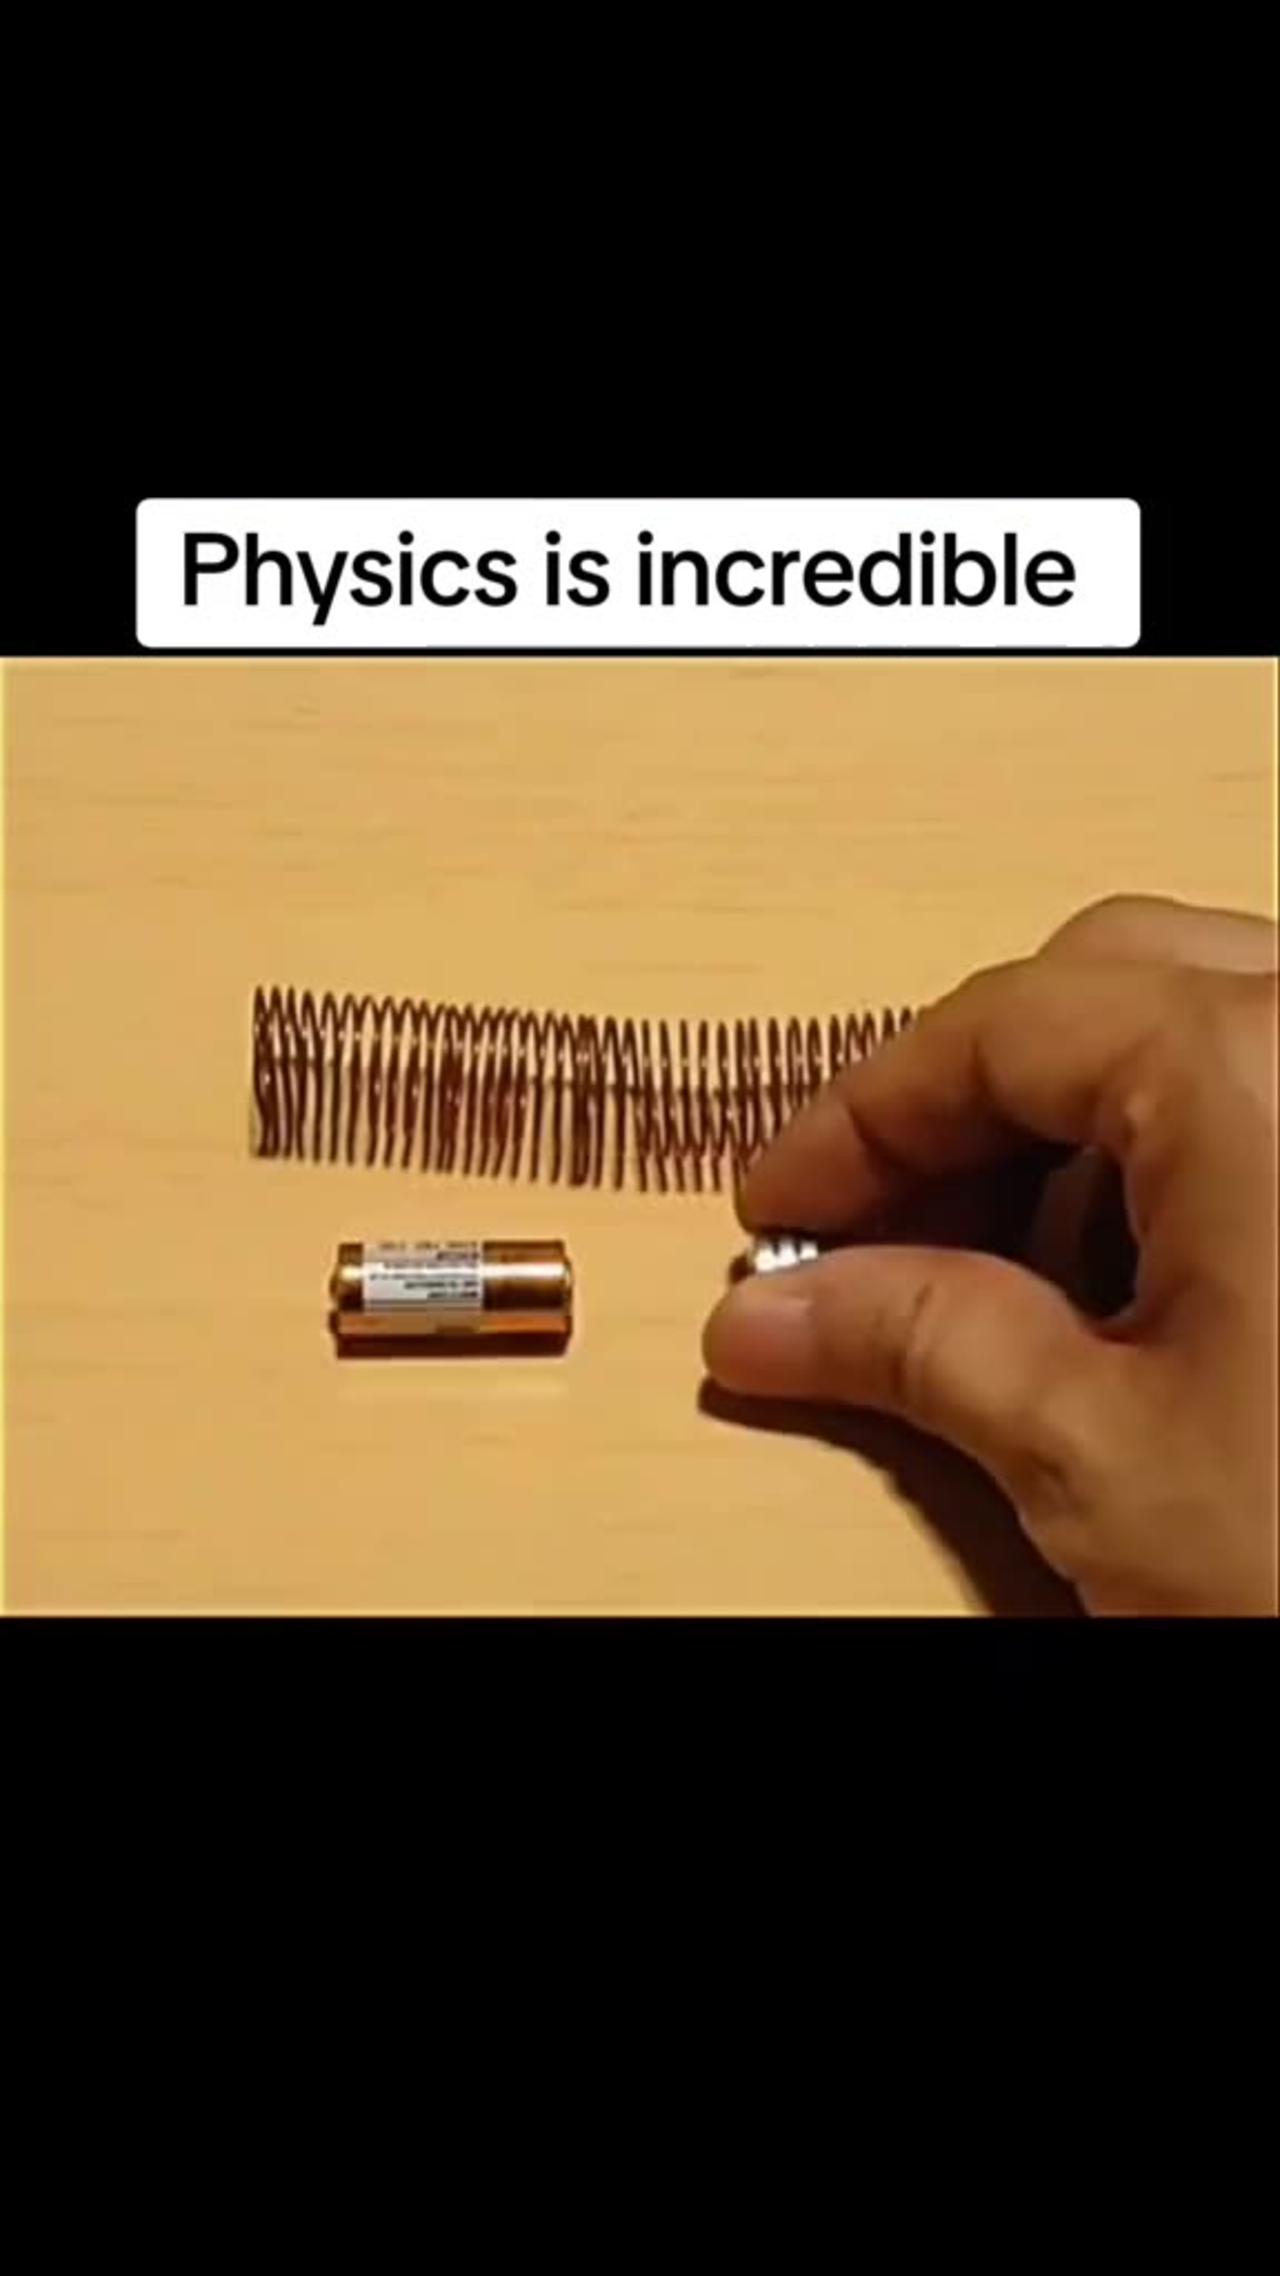 How incredible physics is 😱🤯🧫🧬 watch this science experiment 🤩